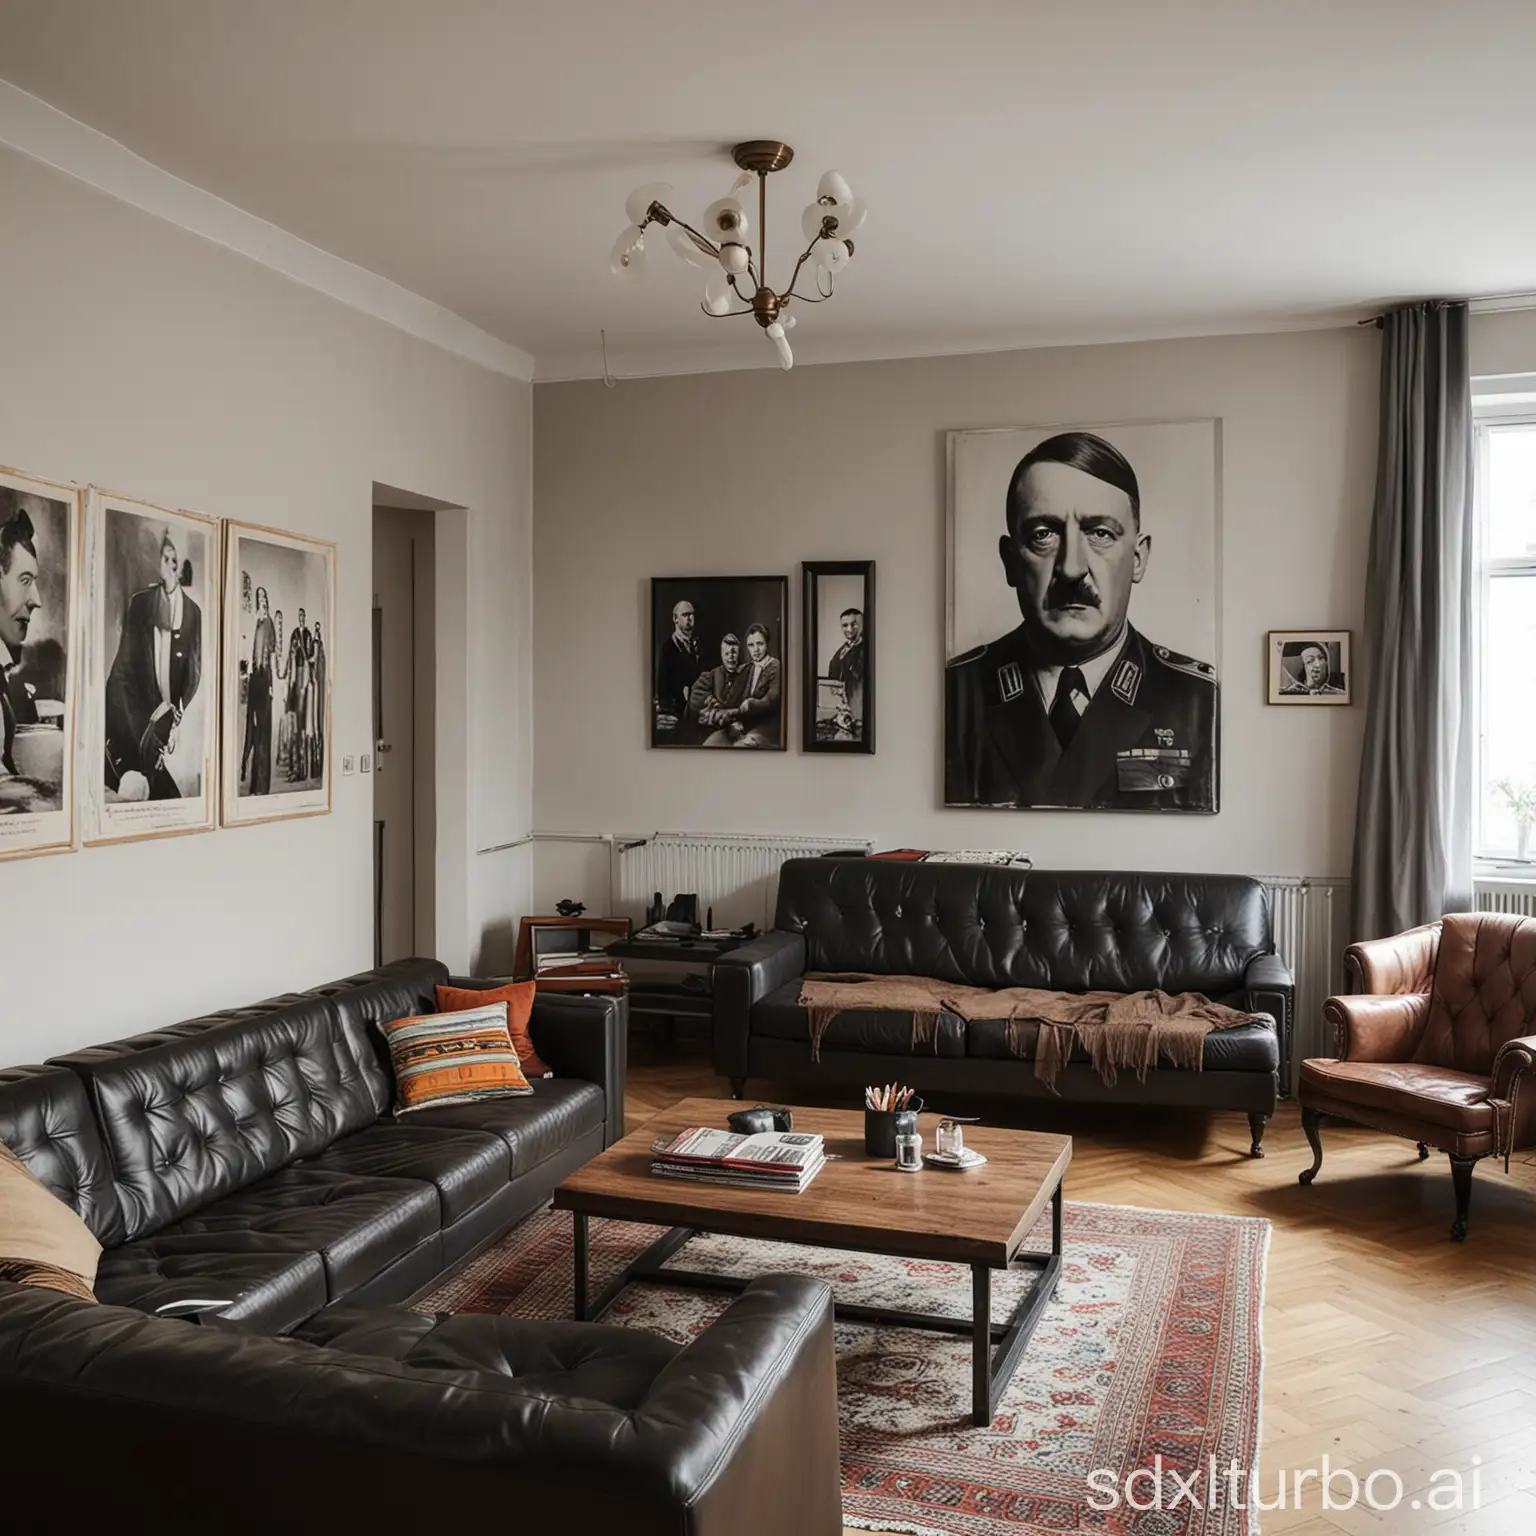 Contemporary-Berlin-Apartment-Living-Room-with-Historical-Artwork-and-Personal-Touches